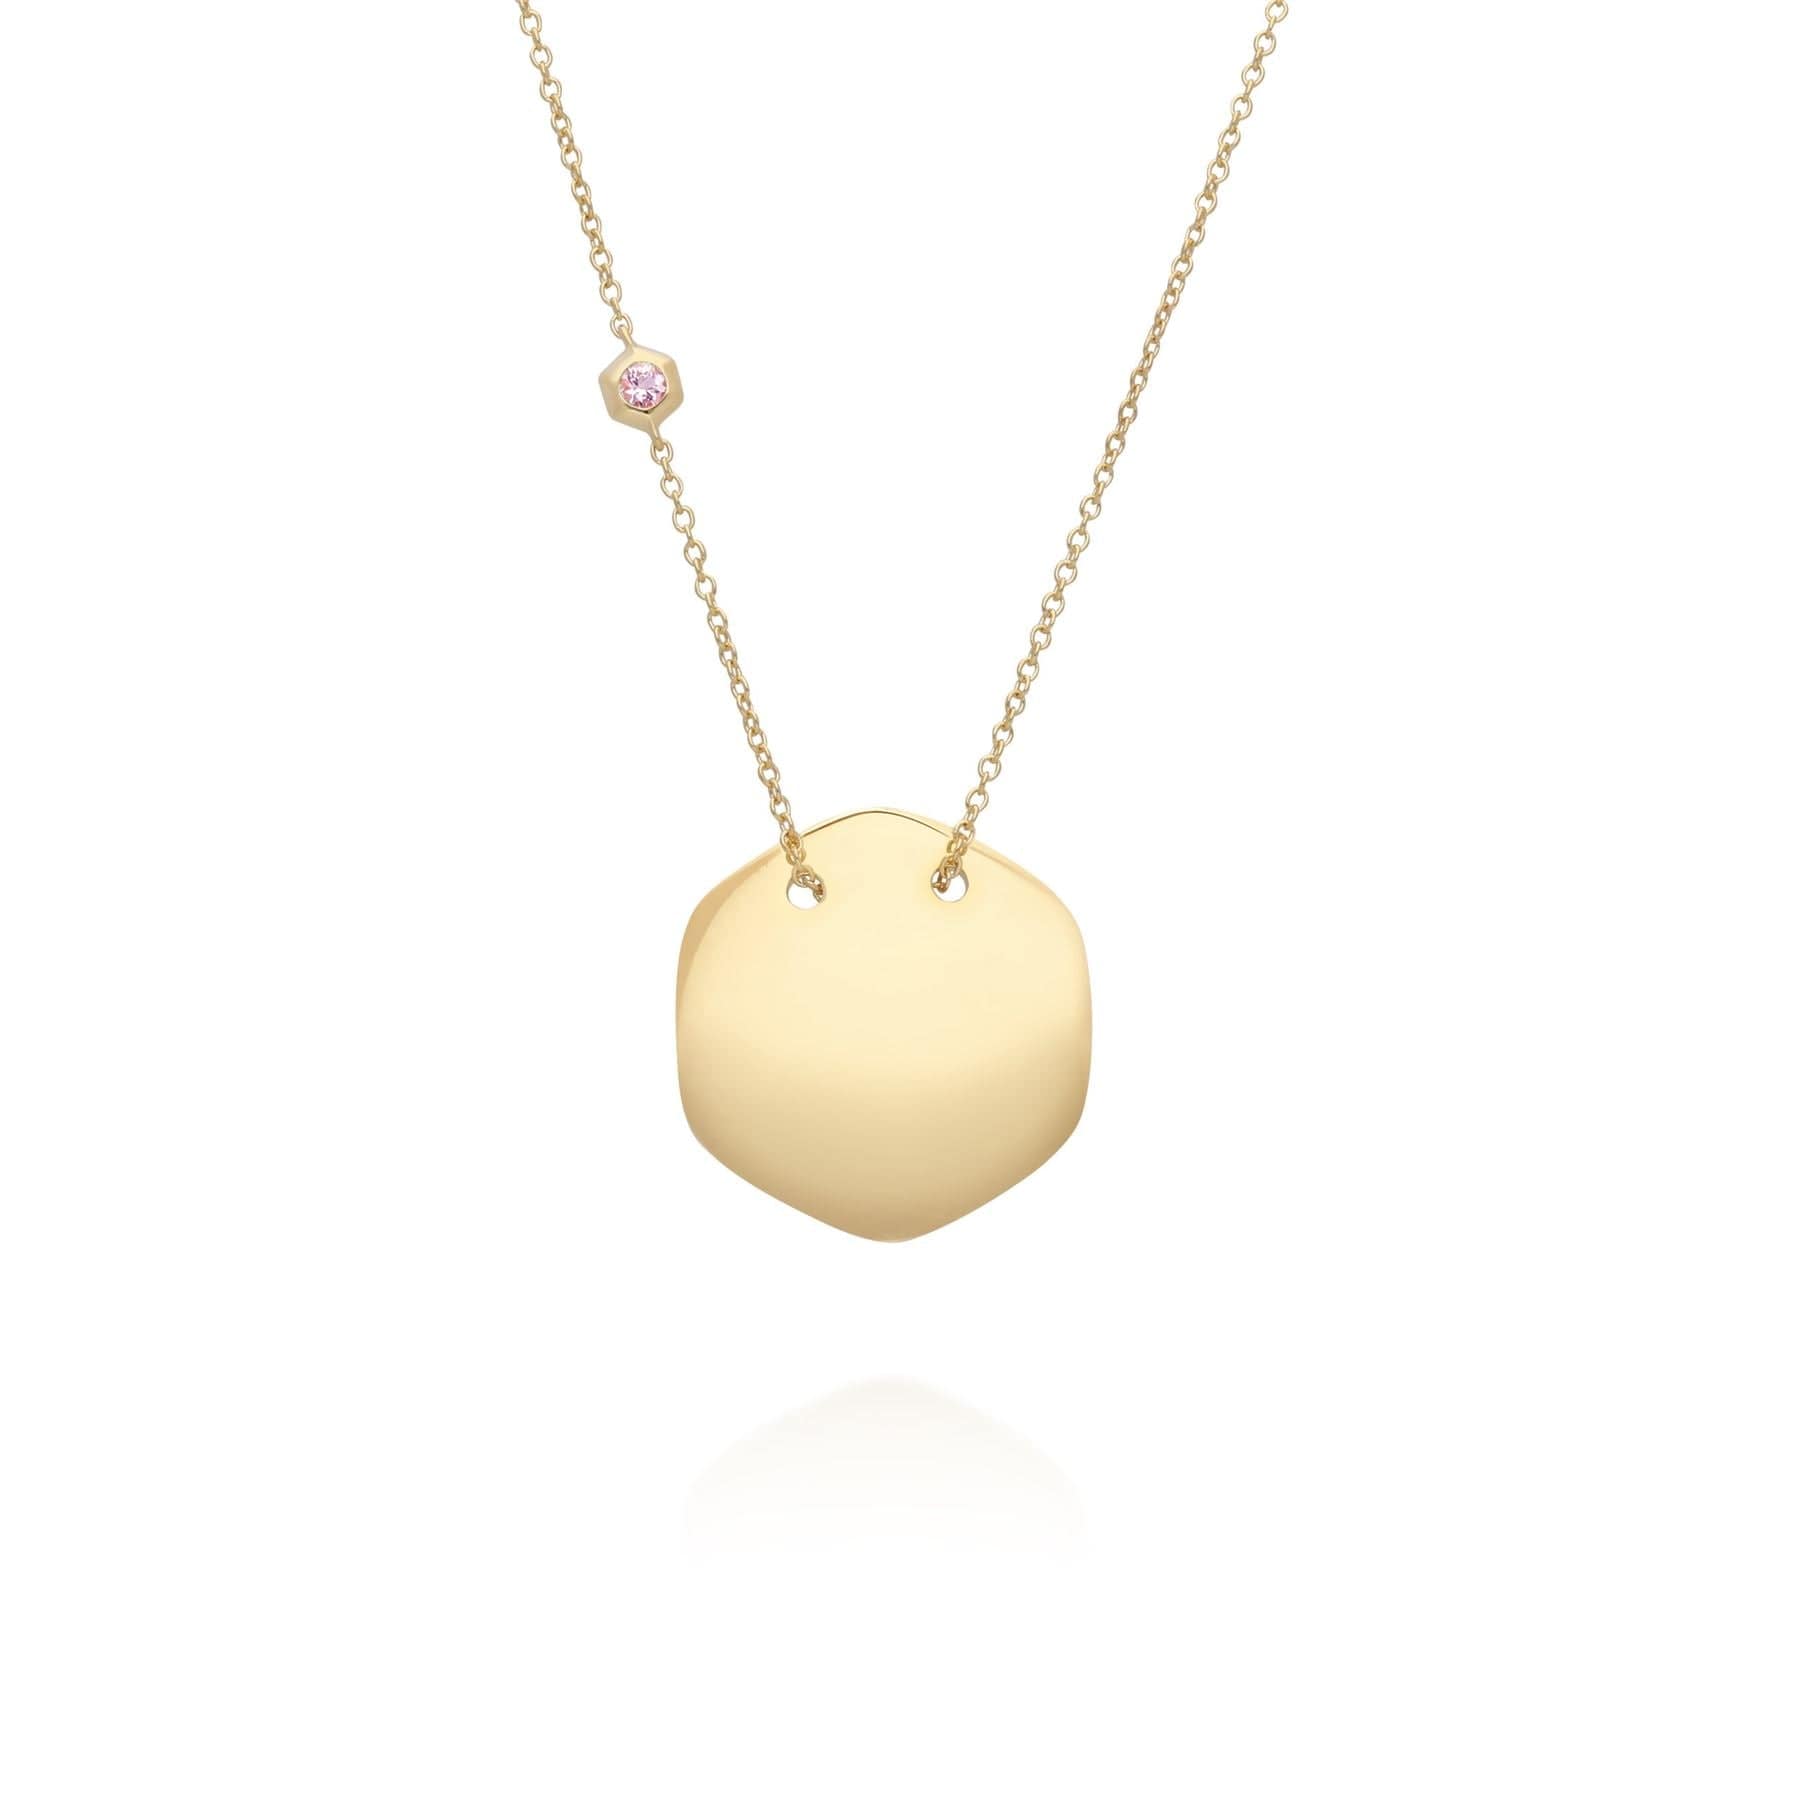 Morganite Engravable Necklace in Yellow Gold Plated Sterling Silver - Gemondo